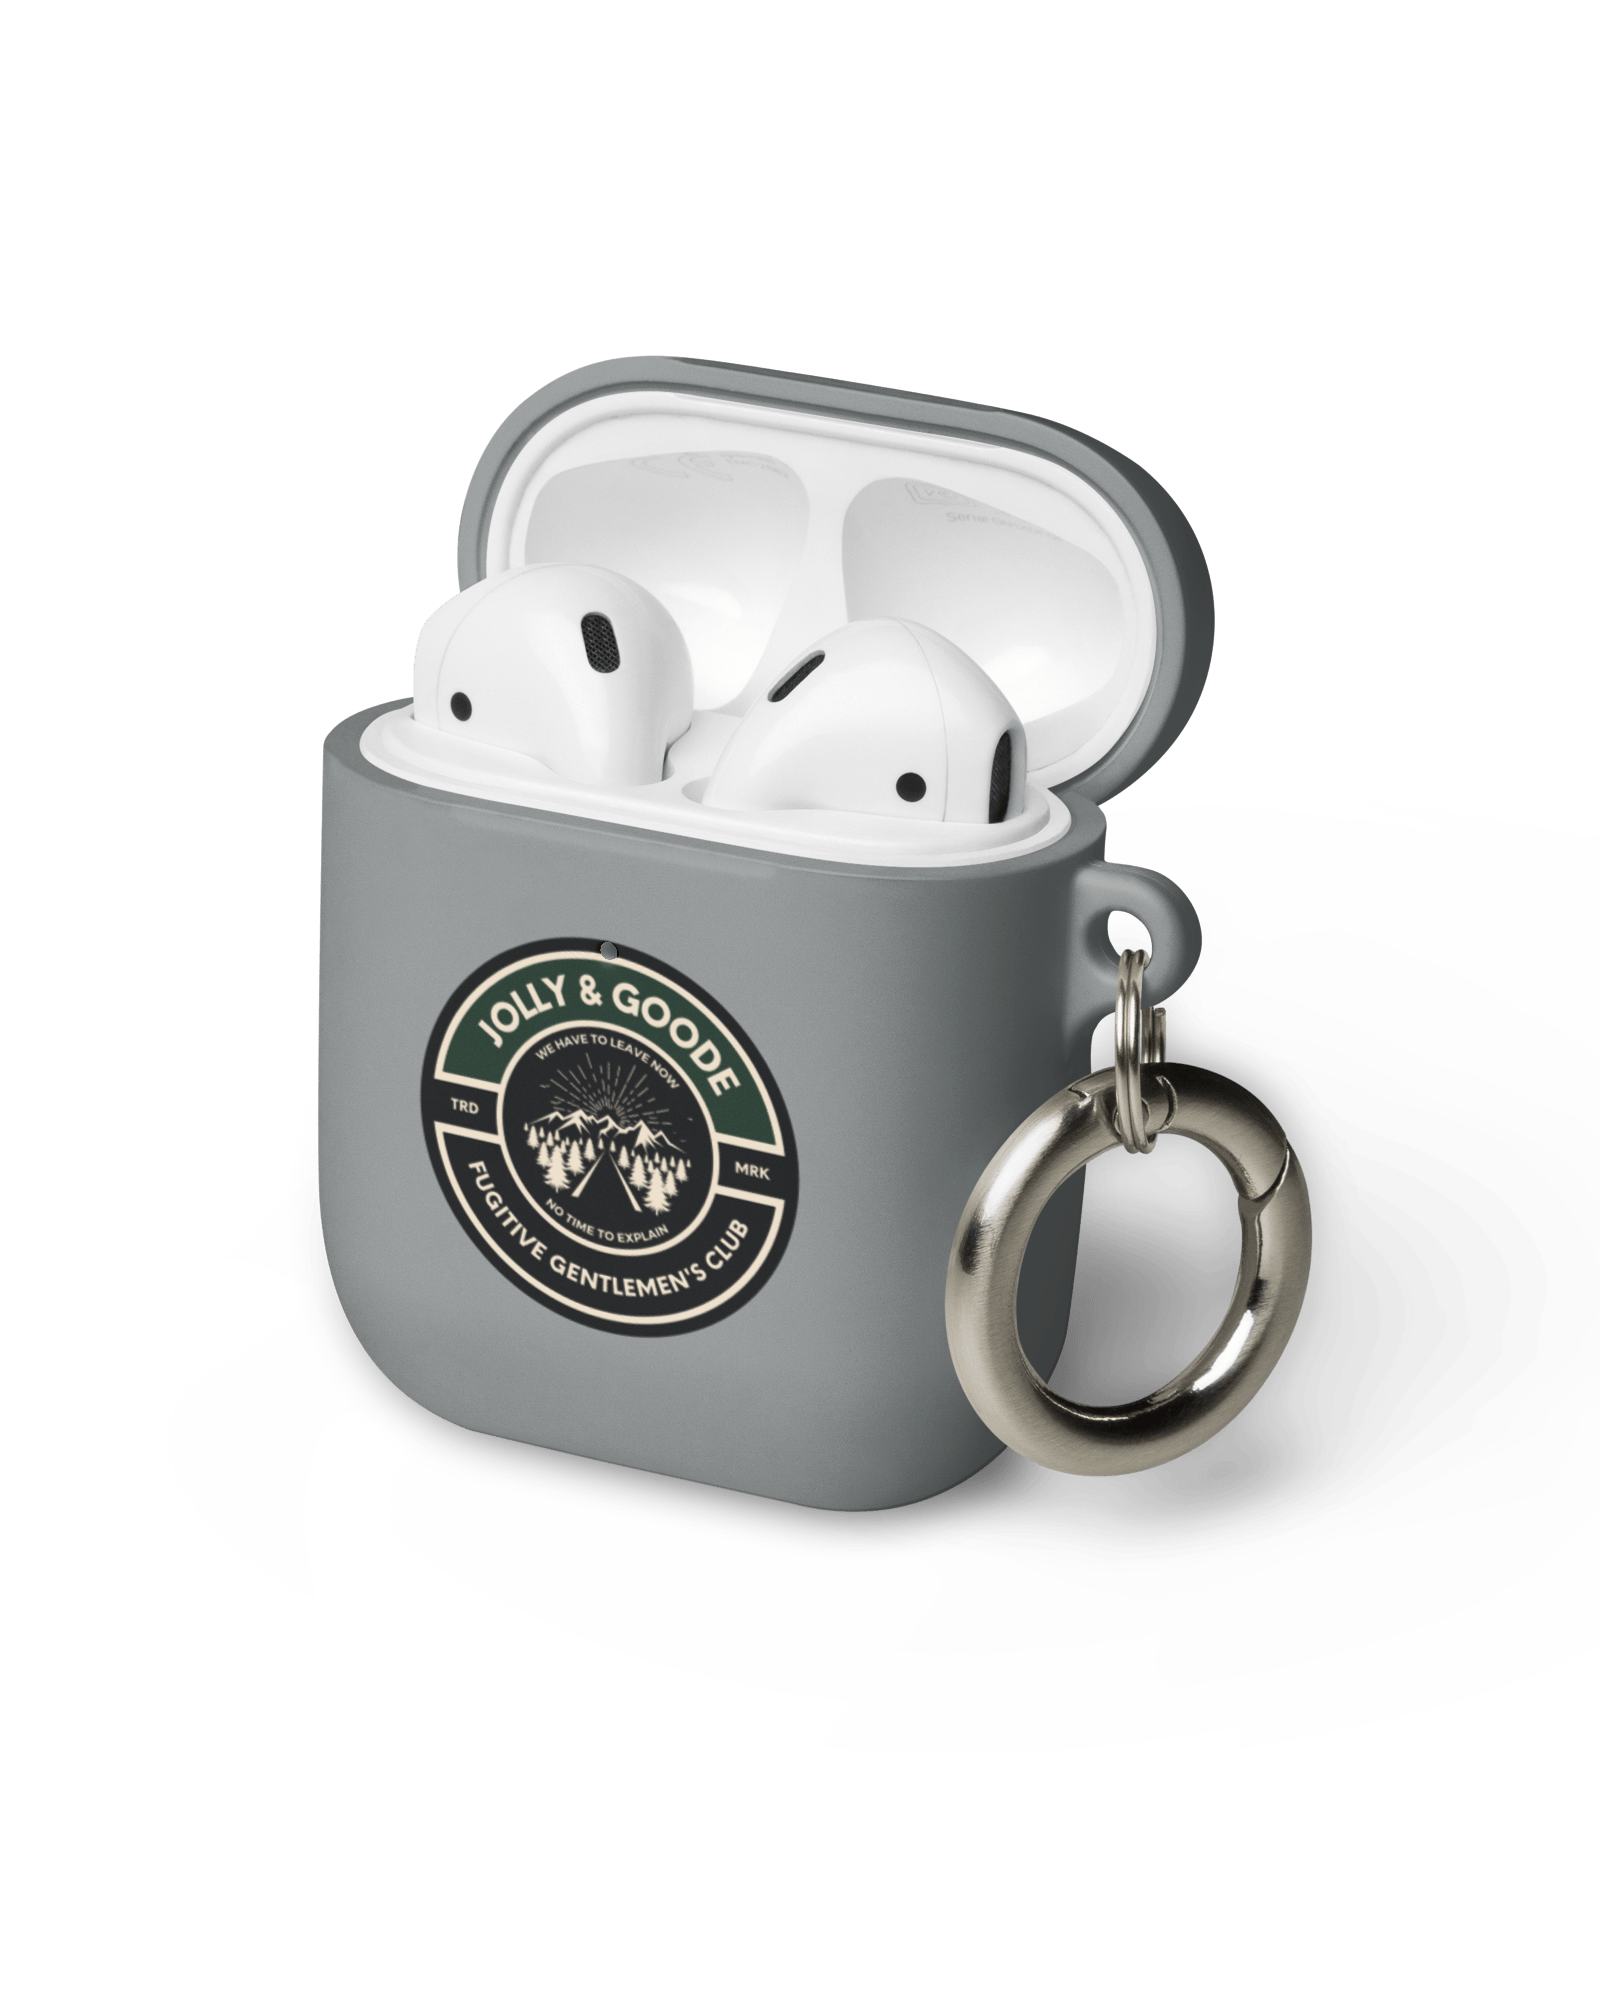 Fugitive Gentlemen's Club AirPods & AirPods Pro Case Grey / AirPods Jolly & Goode